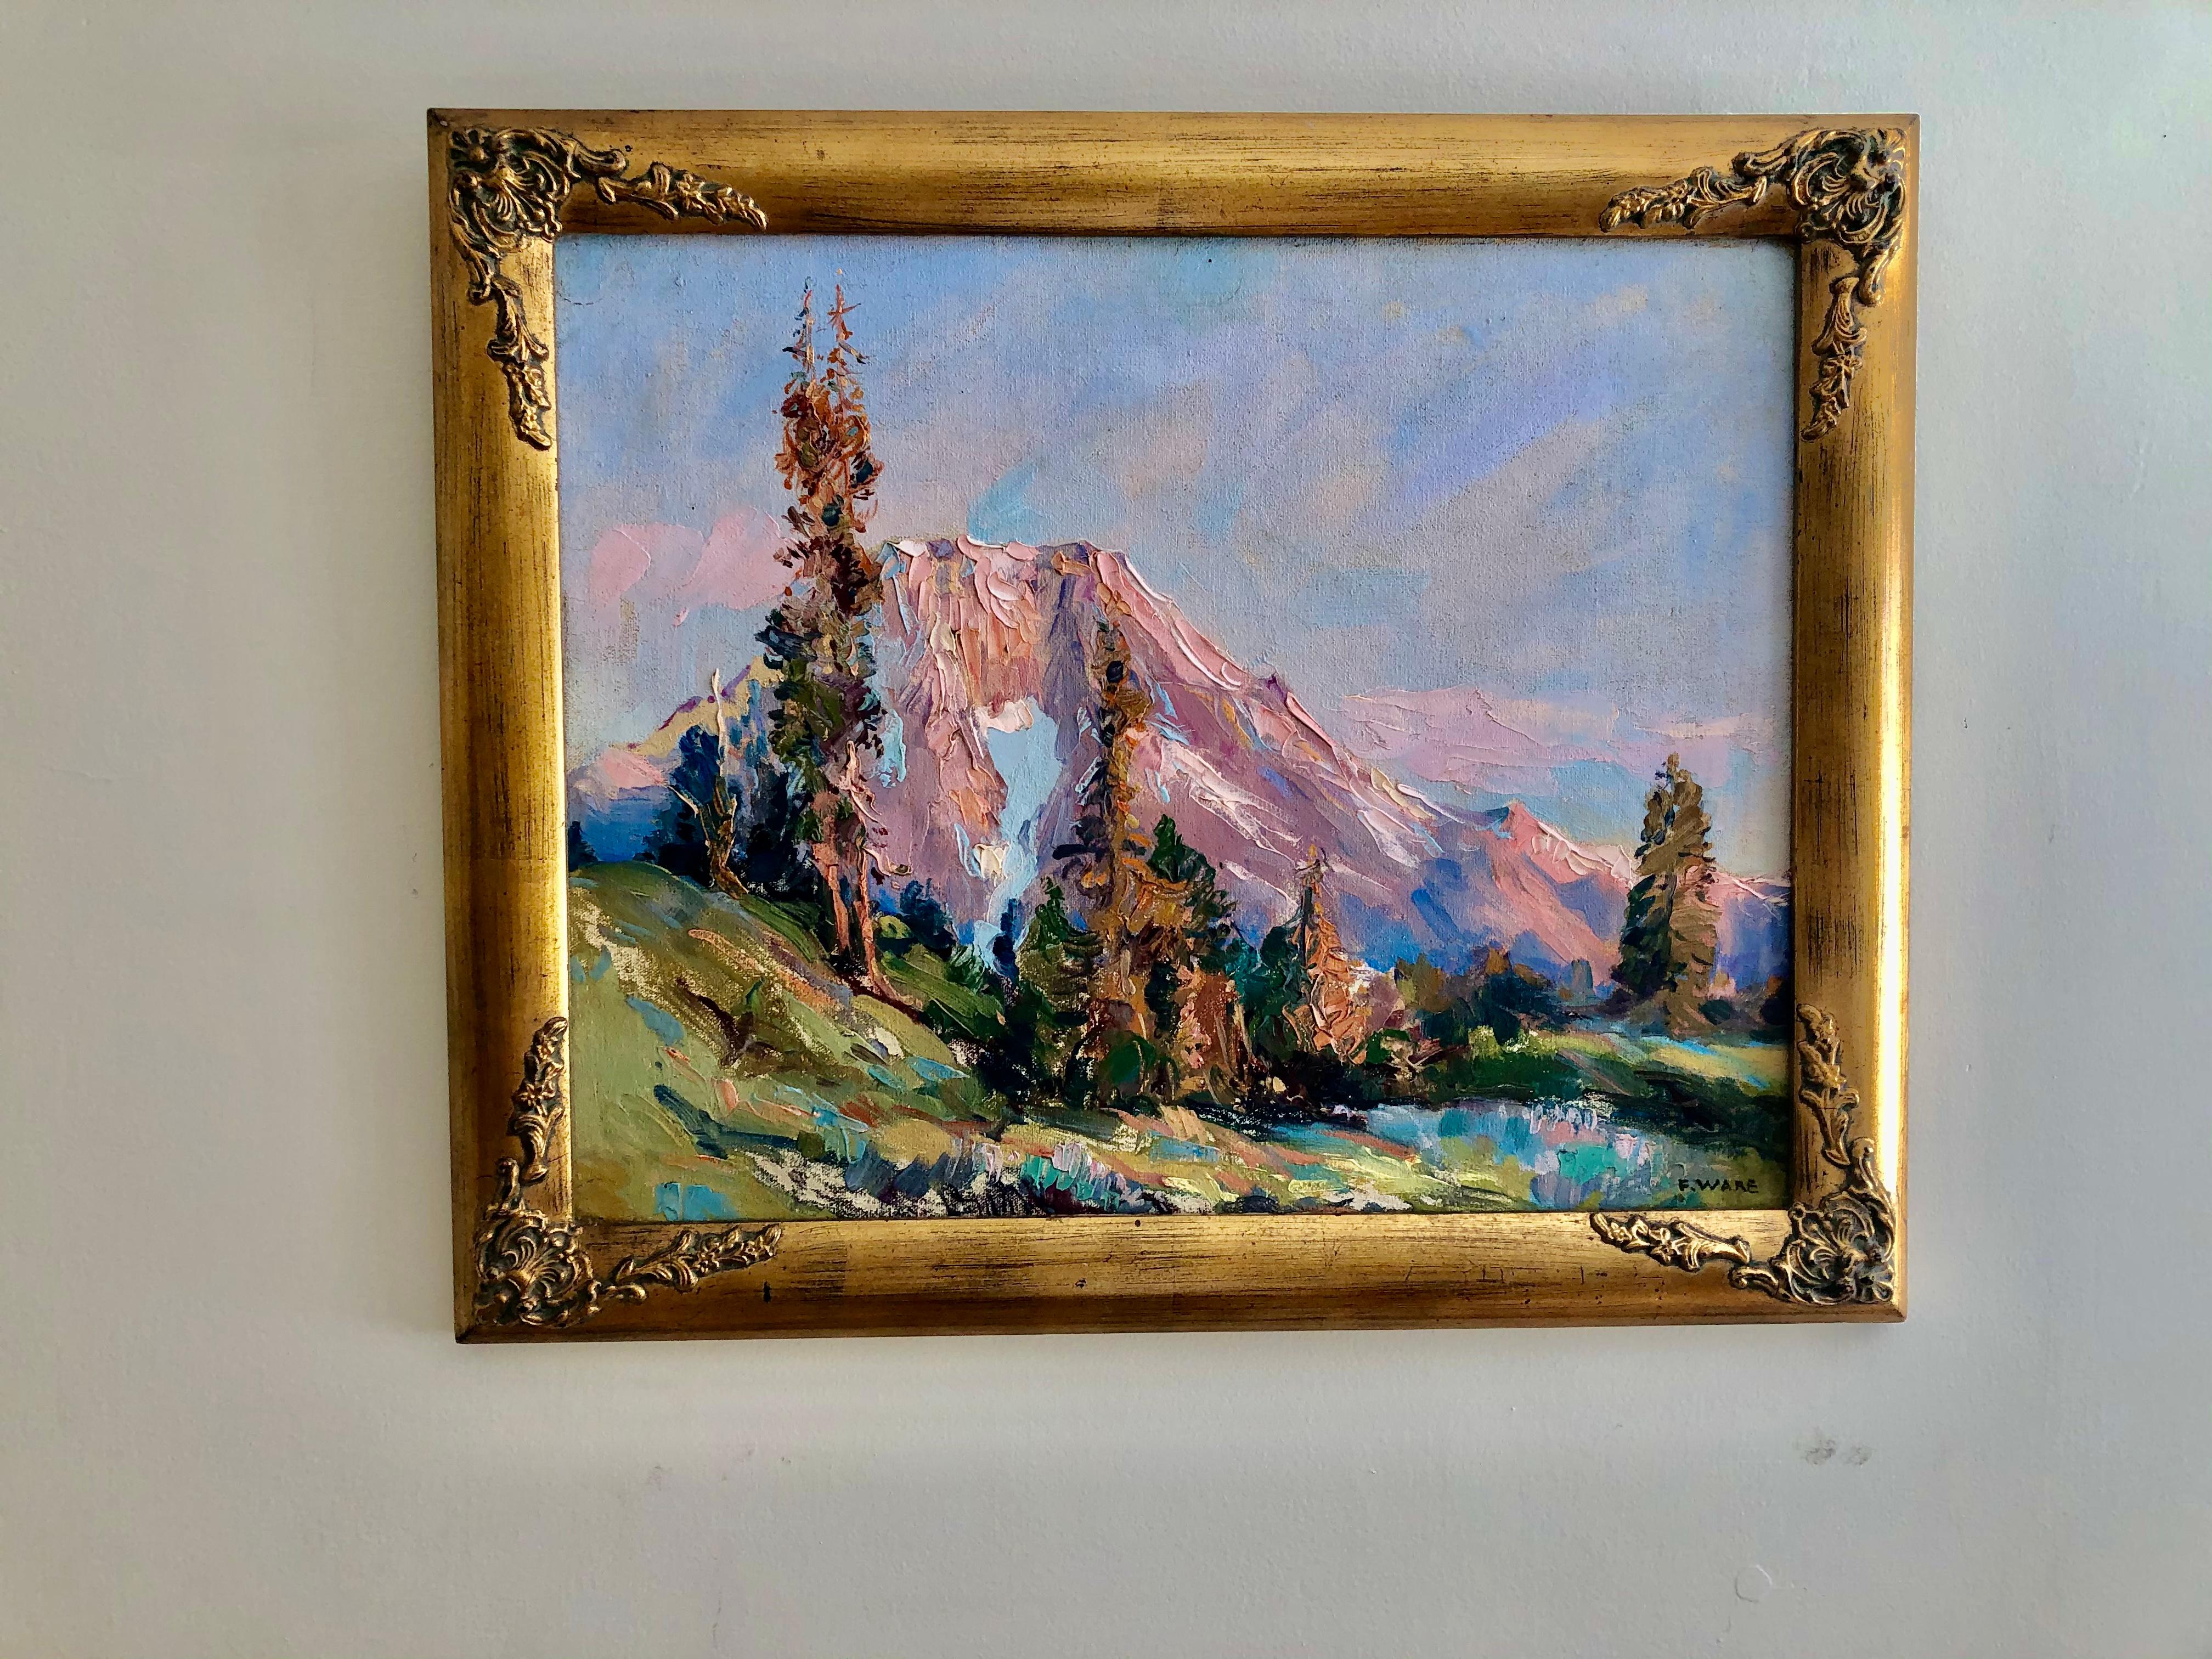 Florence Ware “Sunrise Mt. Moran” Wyoming - Painting by Florence Ellen Ware